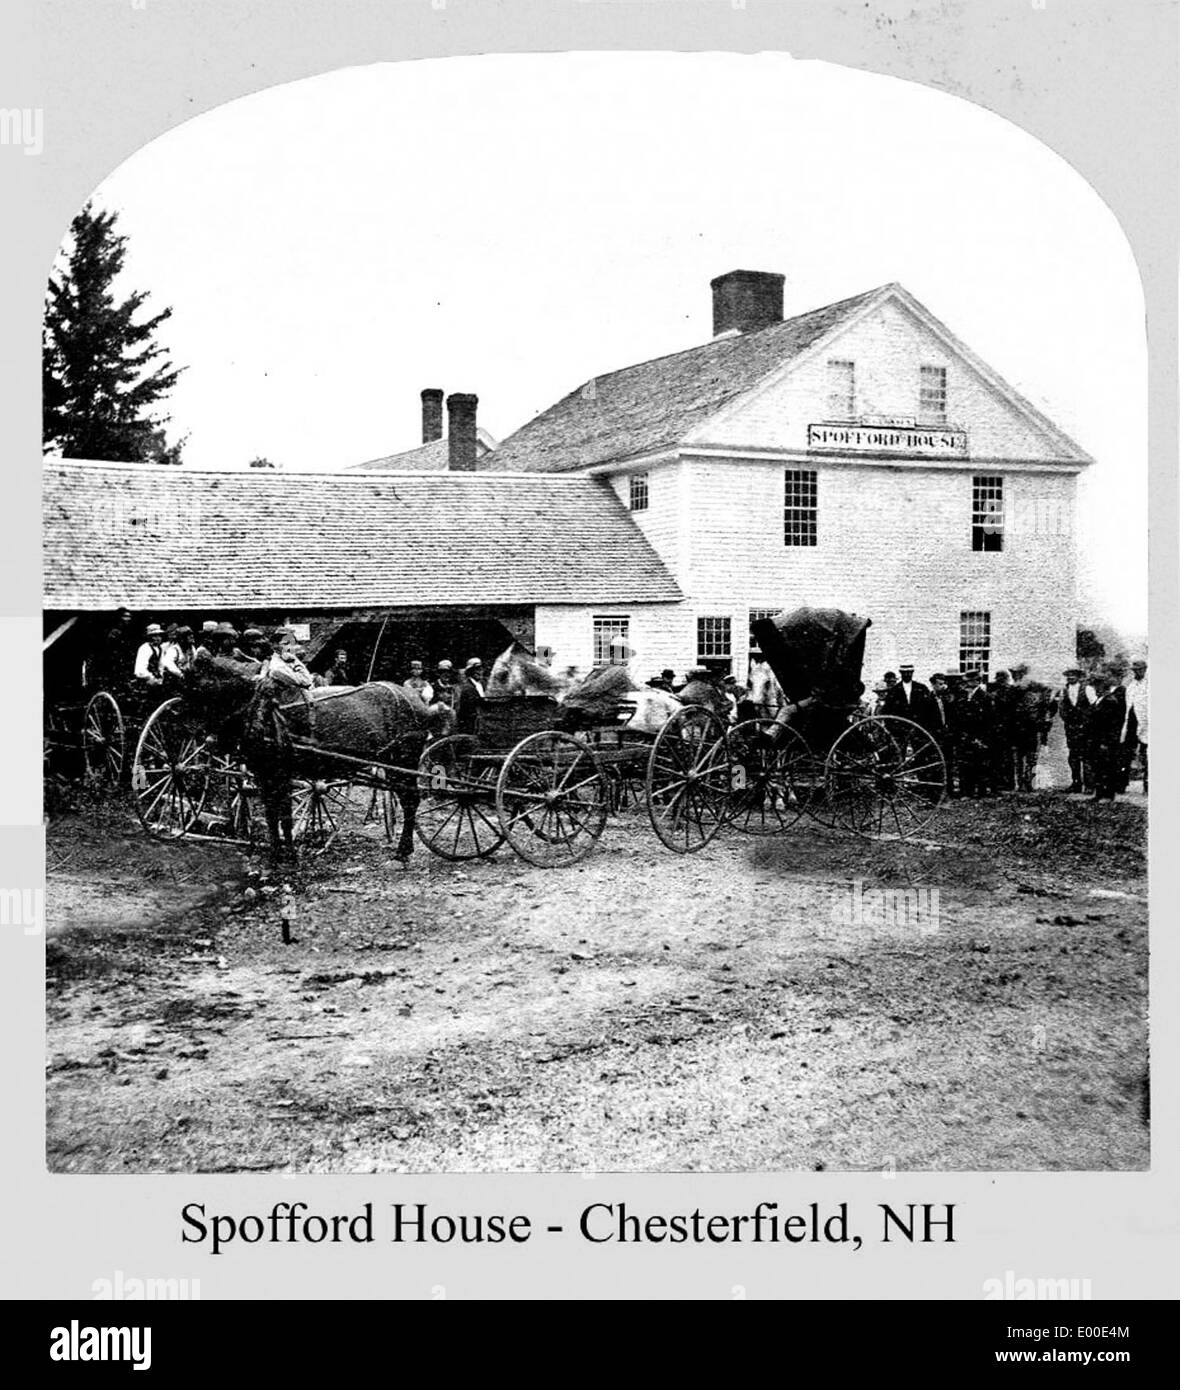 Spofford House in Chesterfield, New Hampshire Stock Photo